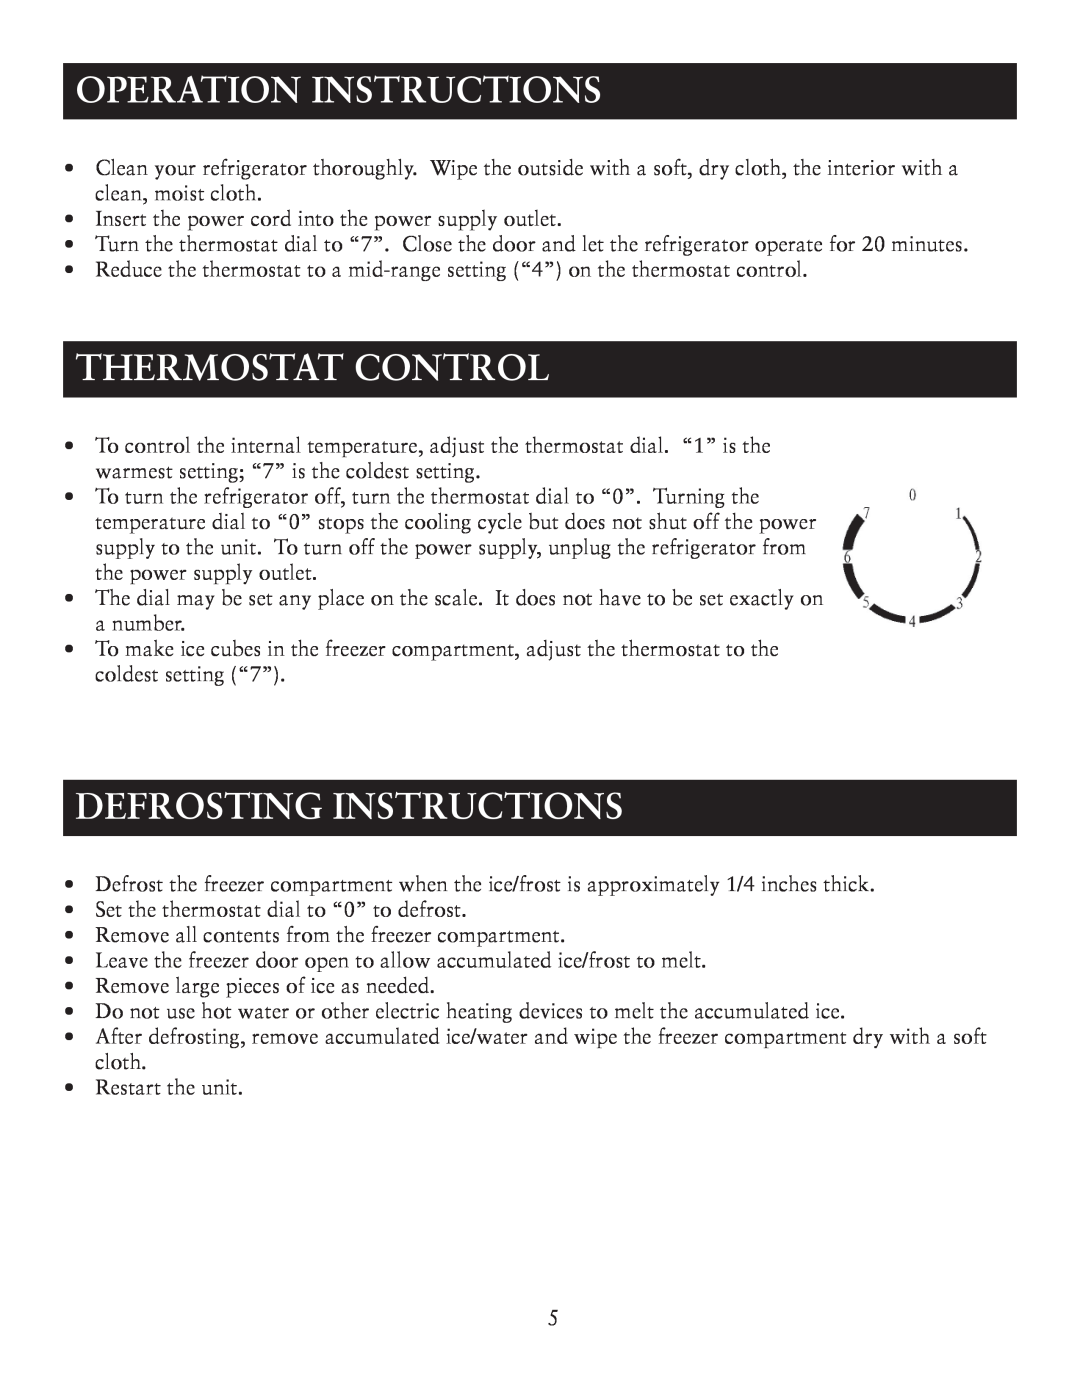 Oster OR03SCGBS user manual Operation Instructions, Thermostat Control, Defrosting Instructions 